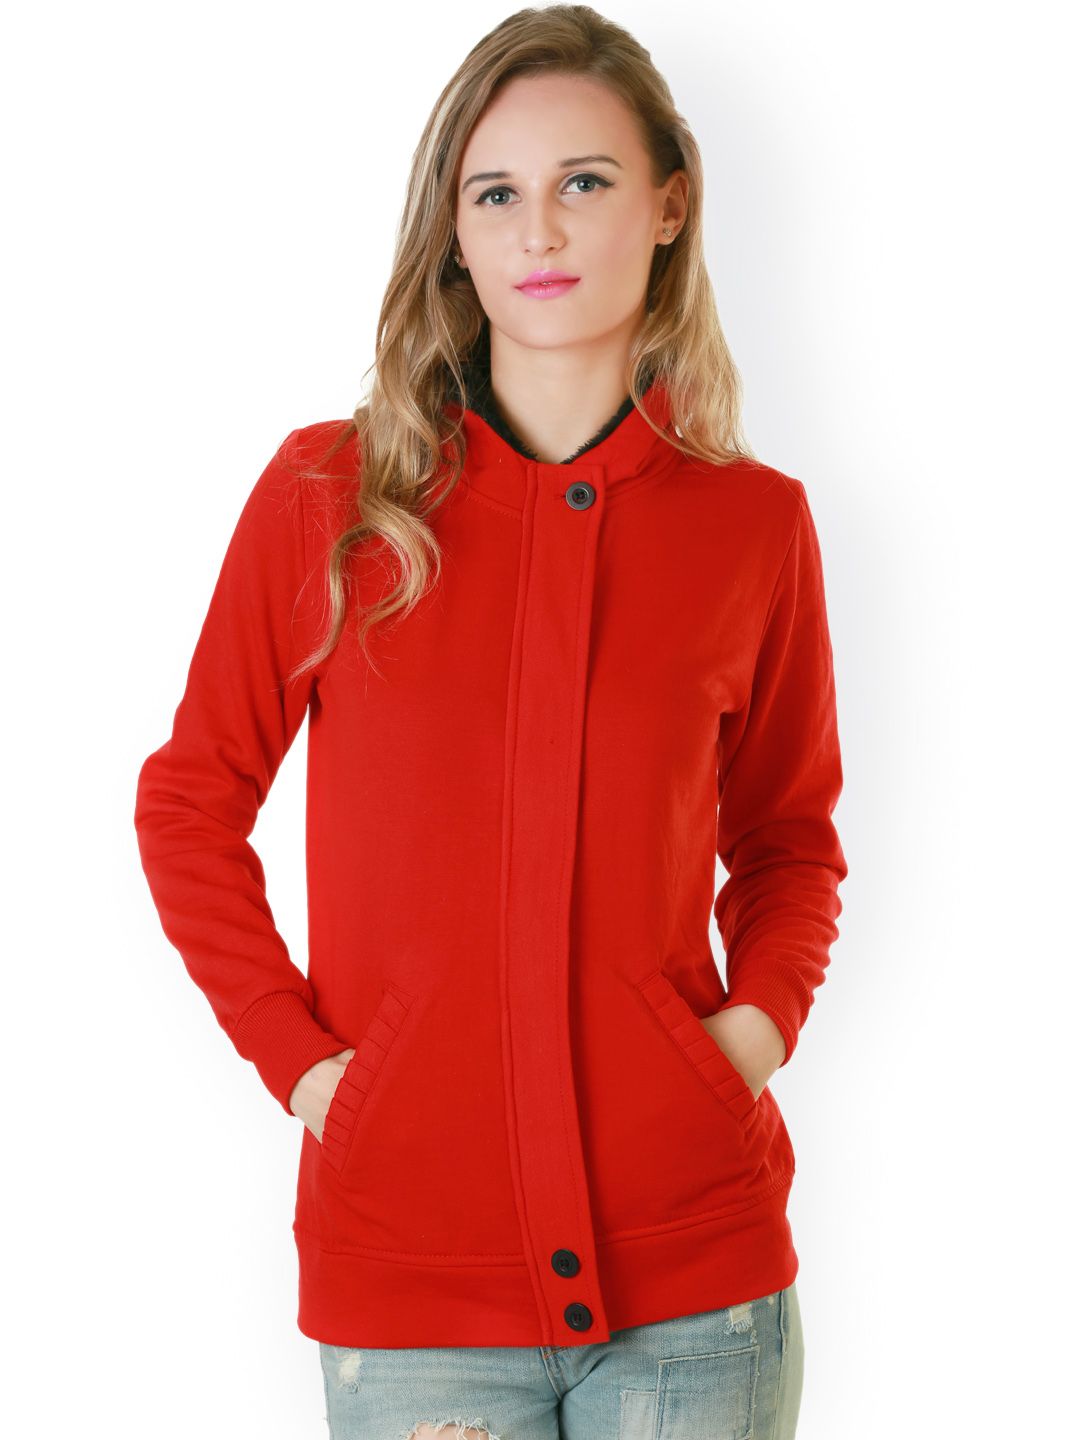 Belle Fille Red Hooded Jacket Price in India